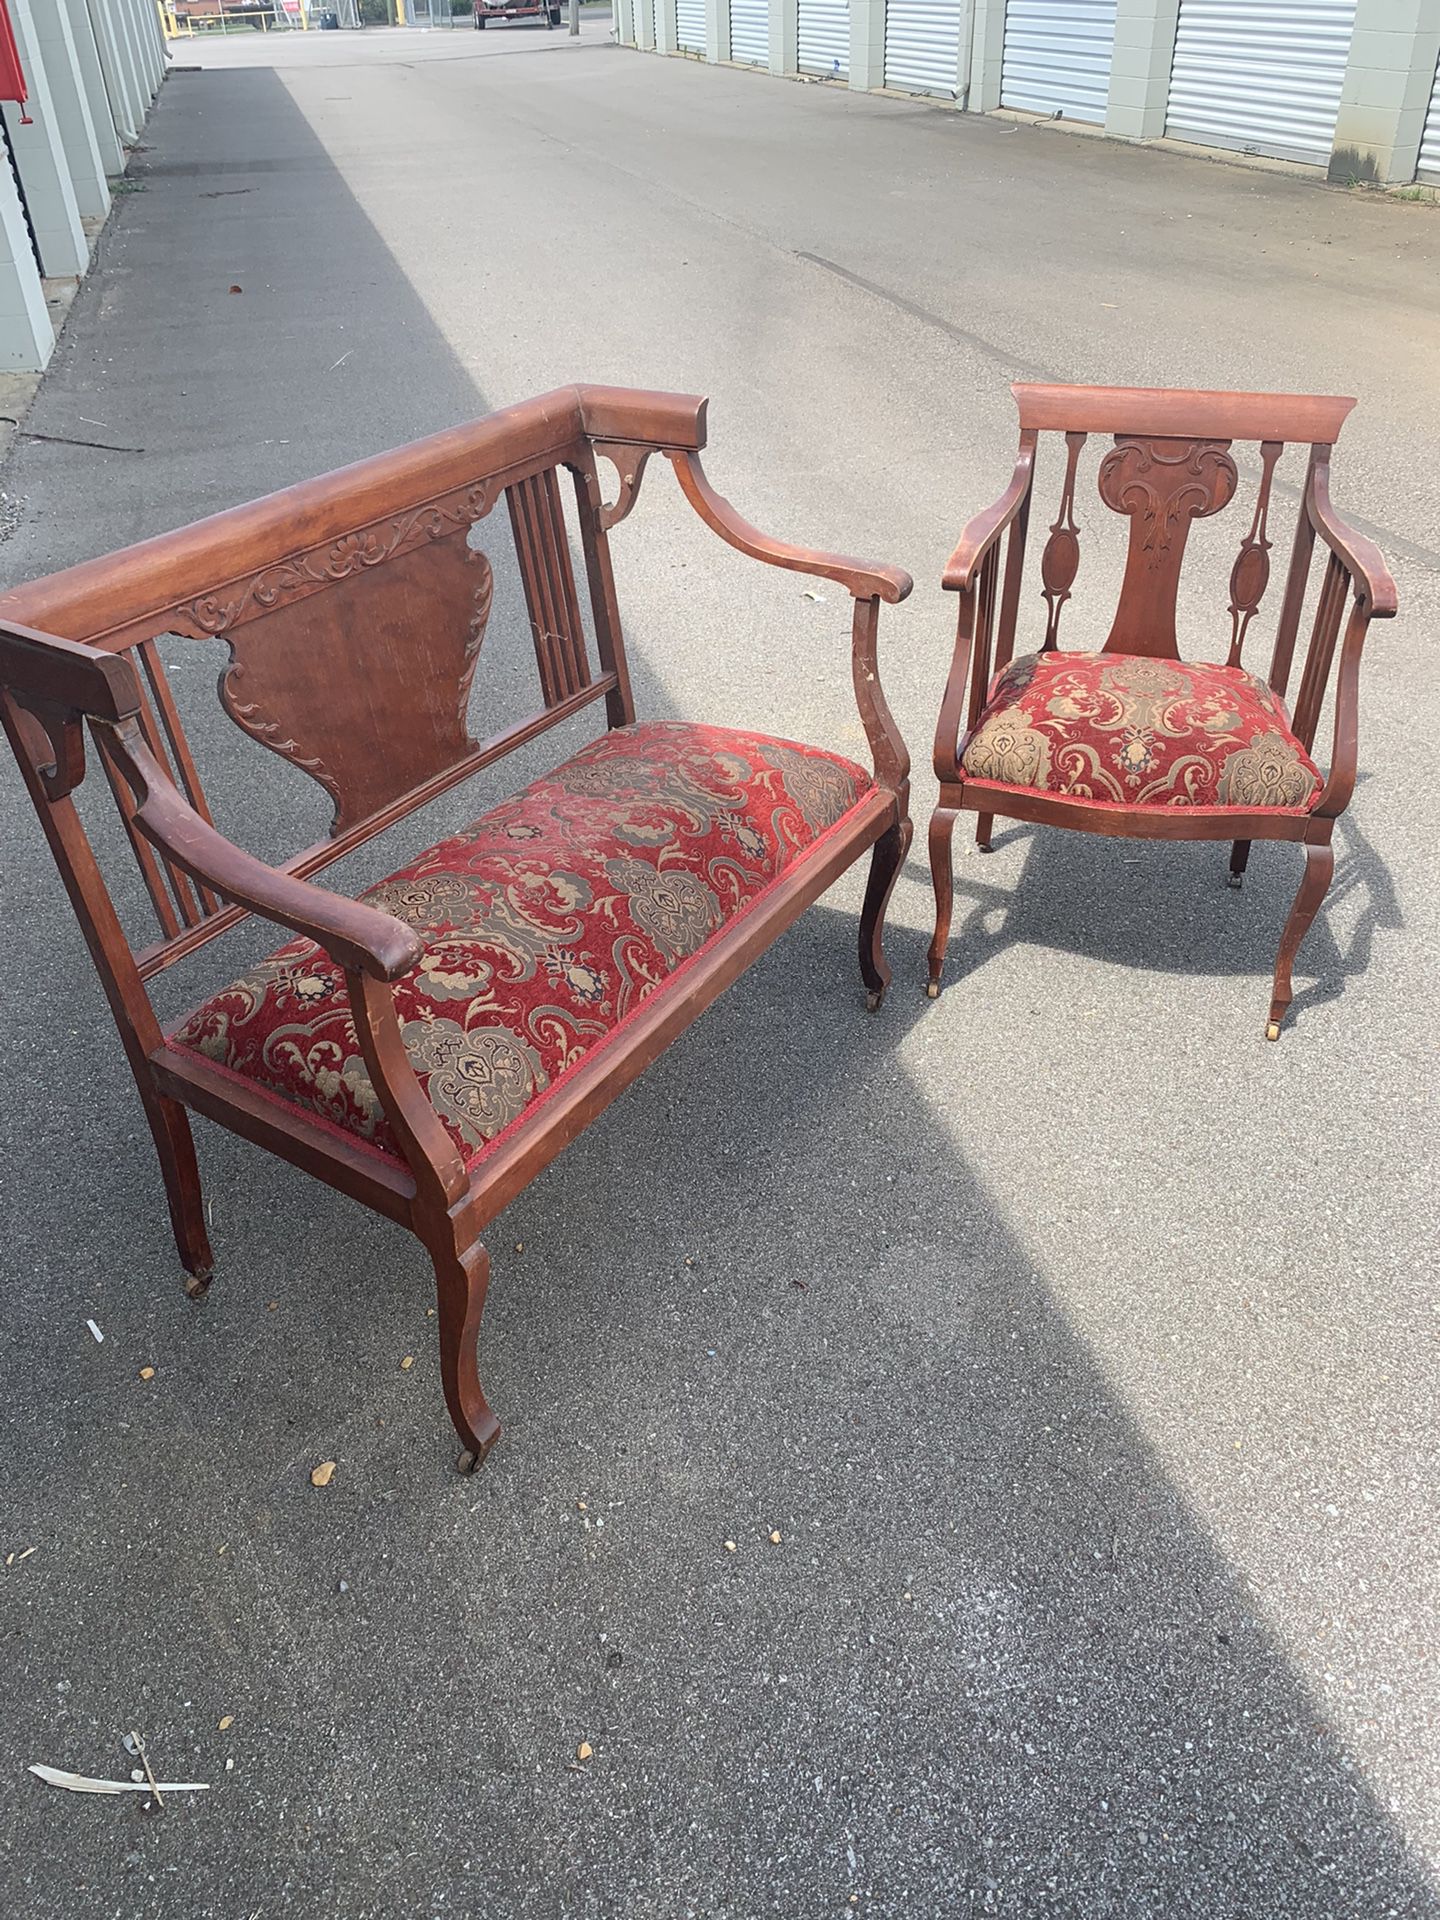 Antique Chair and Settee 